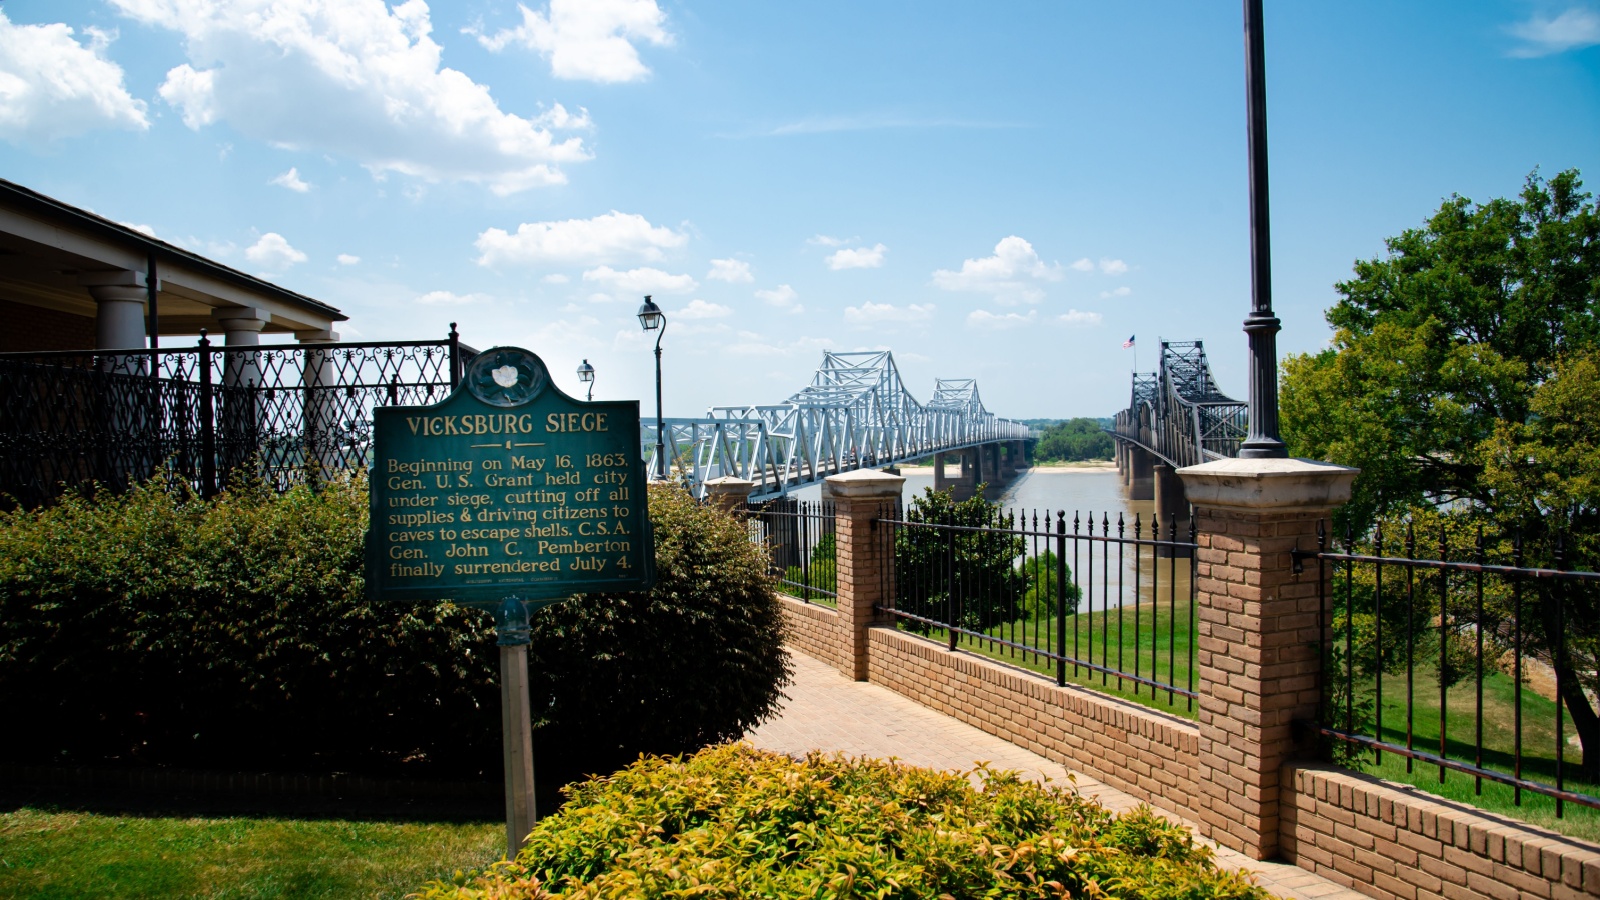 image credit: Trong Nguyen/Shutterstock <p>The Siege of Vicksburg was crucial for the Union’s control over the Mississippi River and is now a celebrated part of the Vicksburg National Military Park. Visitors can tour the restored ironclad USS Cairo and the sprawling national cemetery. The park’s extensive network of trenches and artillery placements still tells the harrowing tale of the siege.</p>